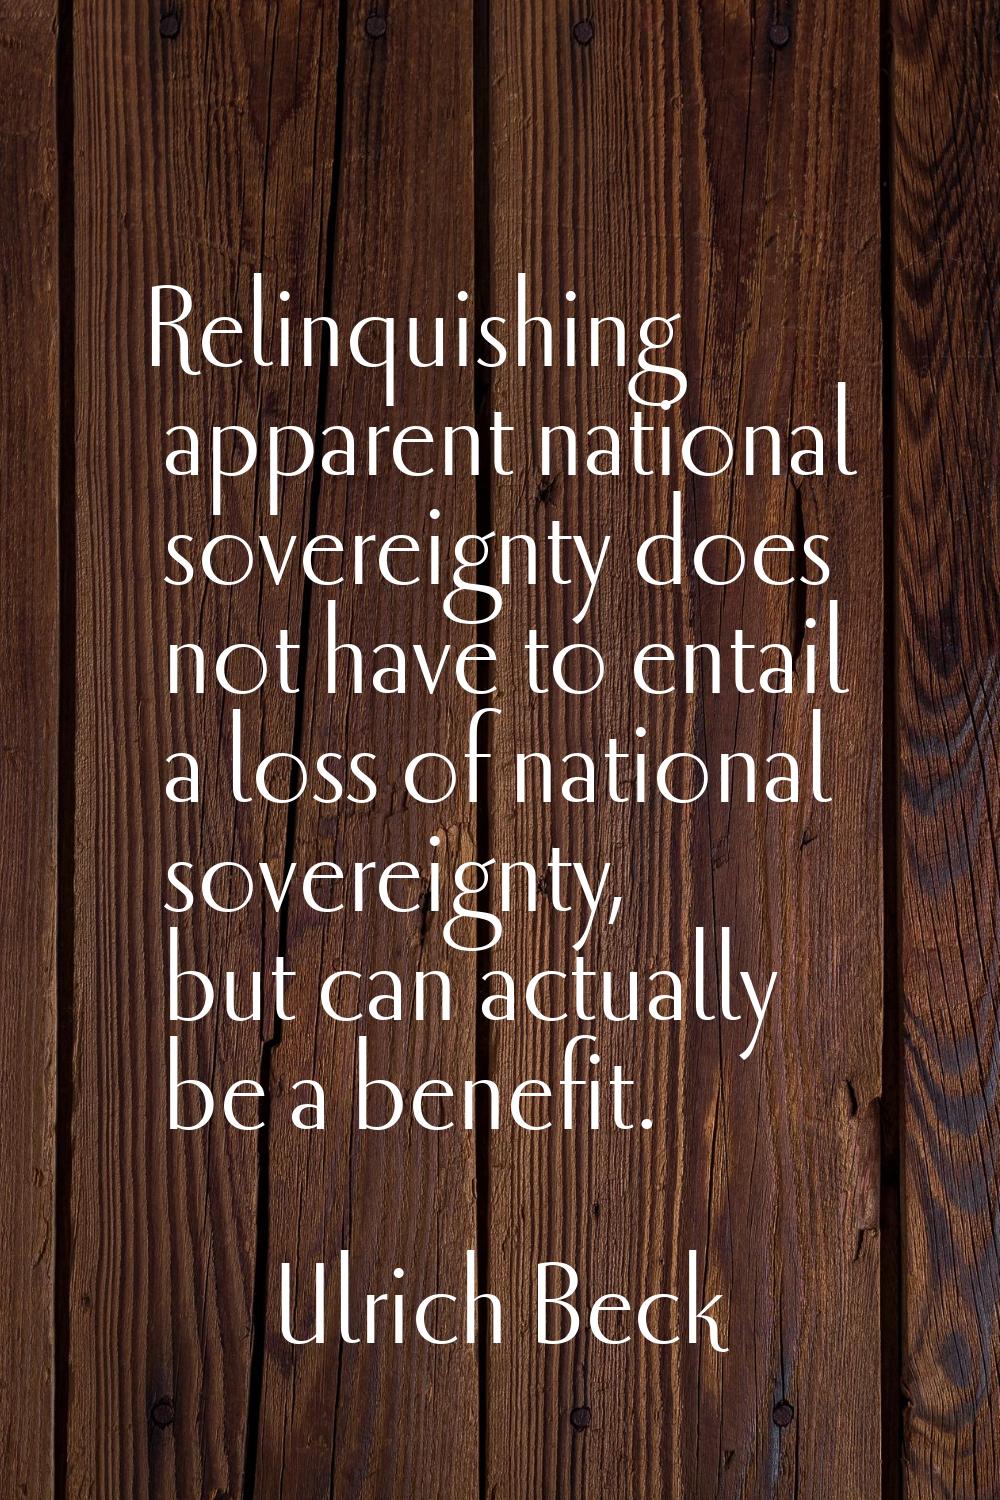 Relinquishing apparent national sovereignty does not have to entail a loss of national sovereignty,